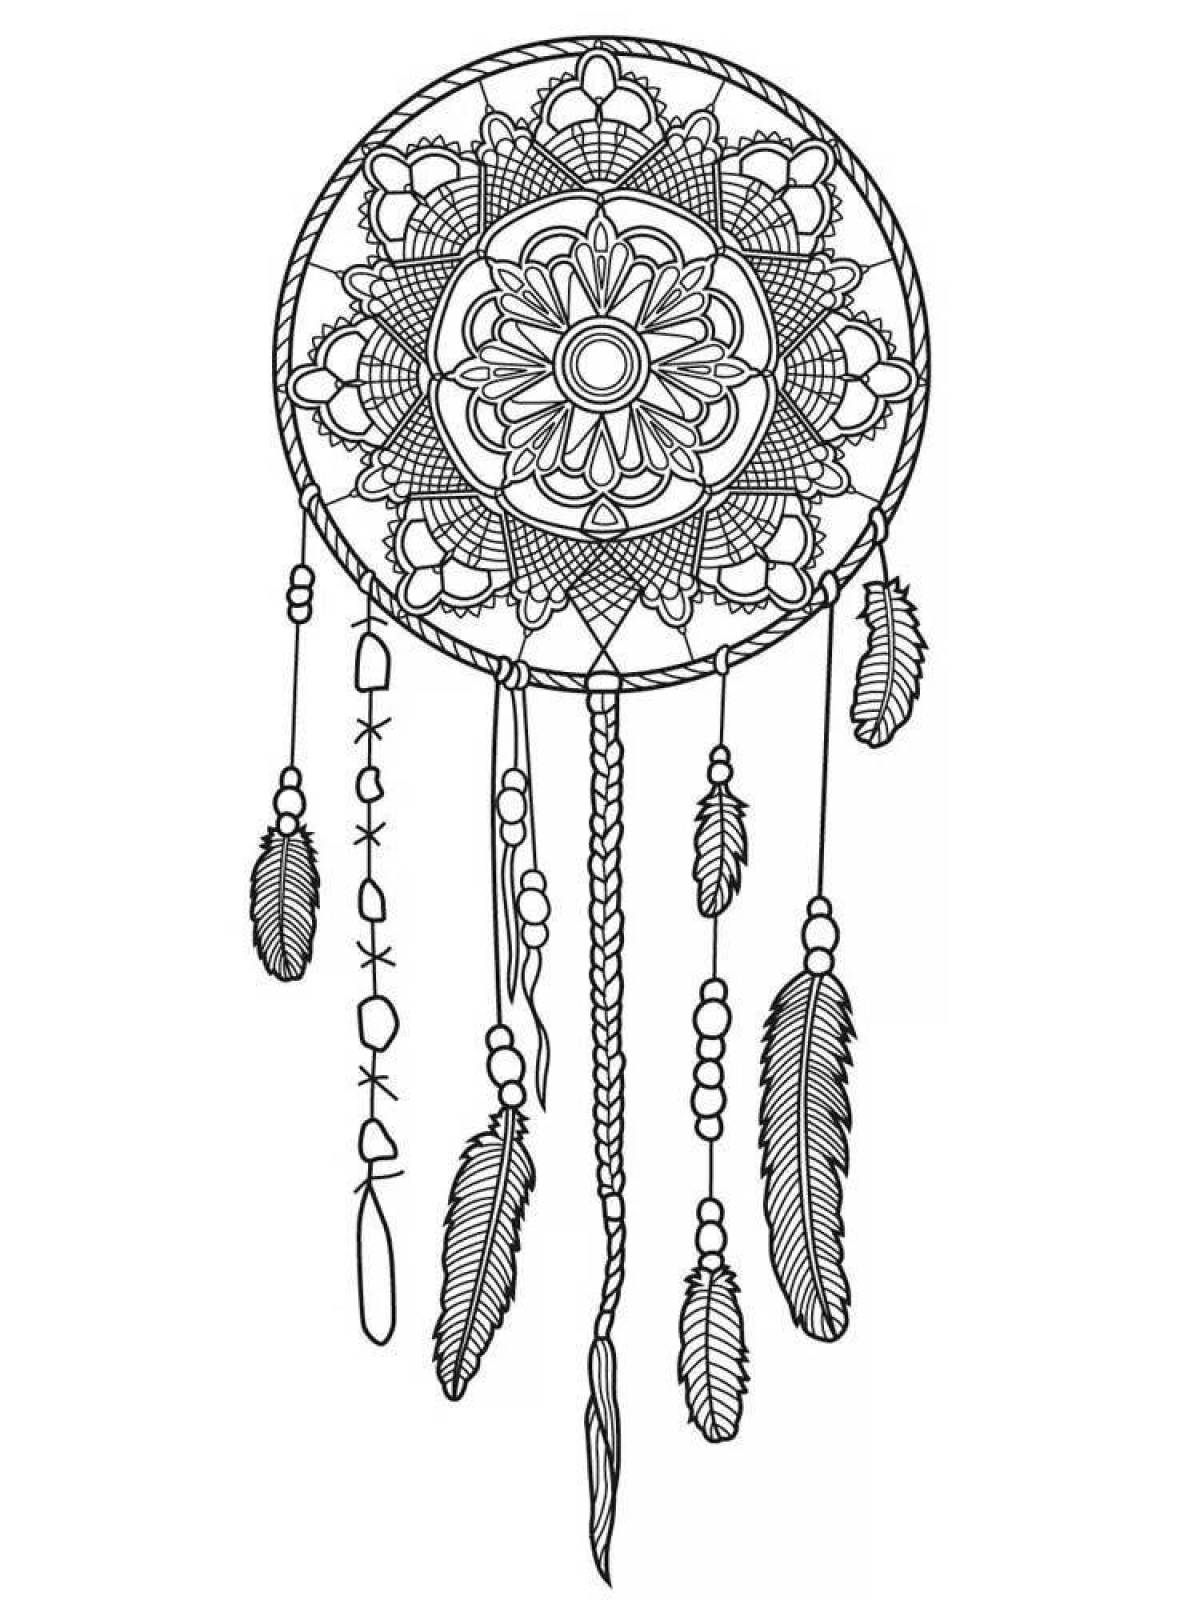 Beautiful dreamcatcher coloring page